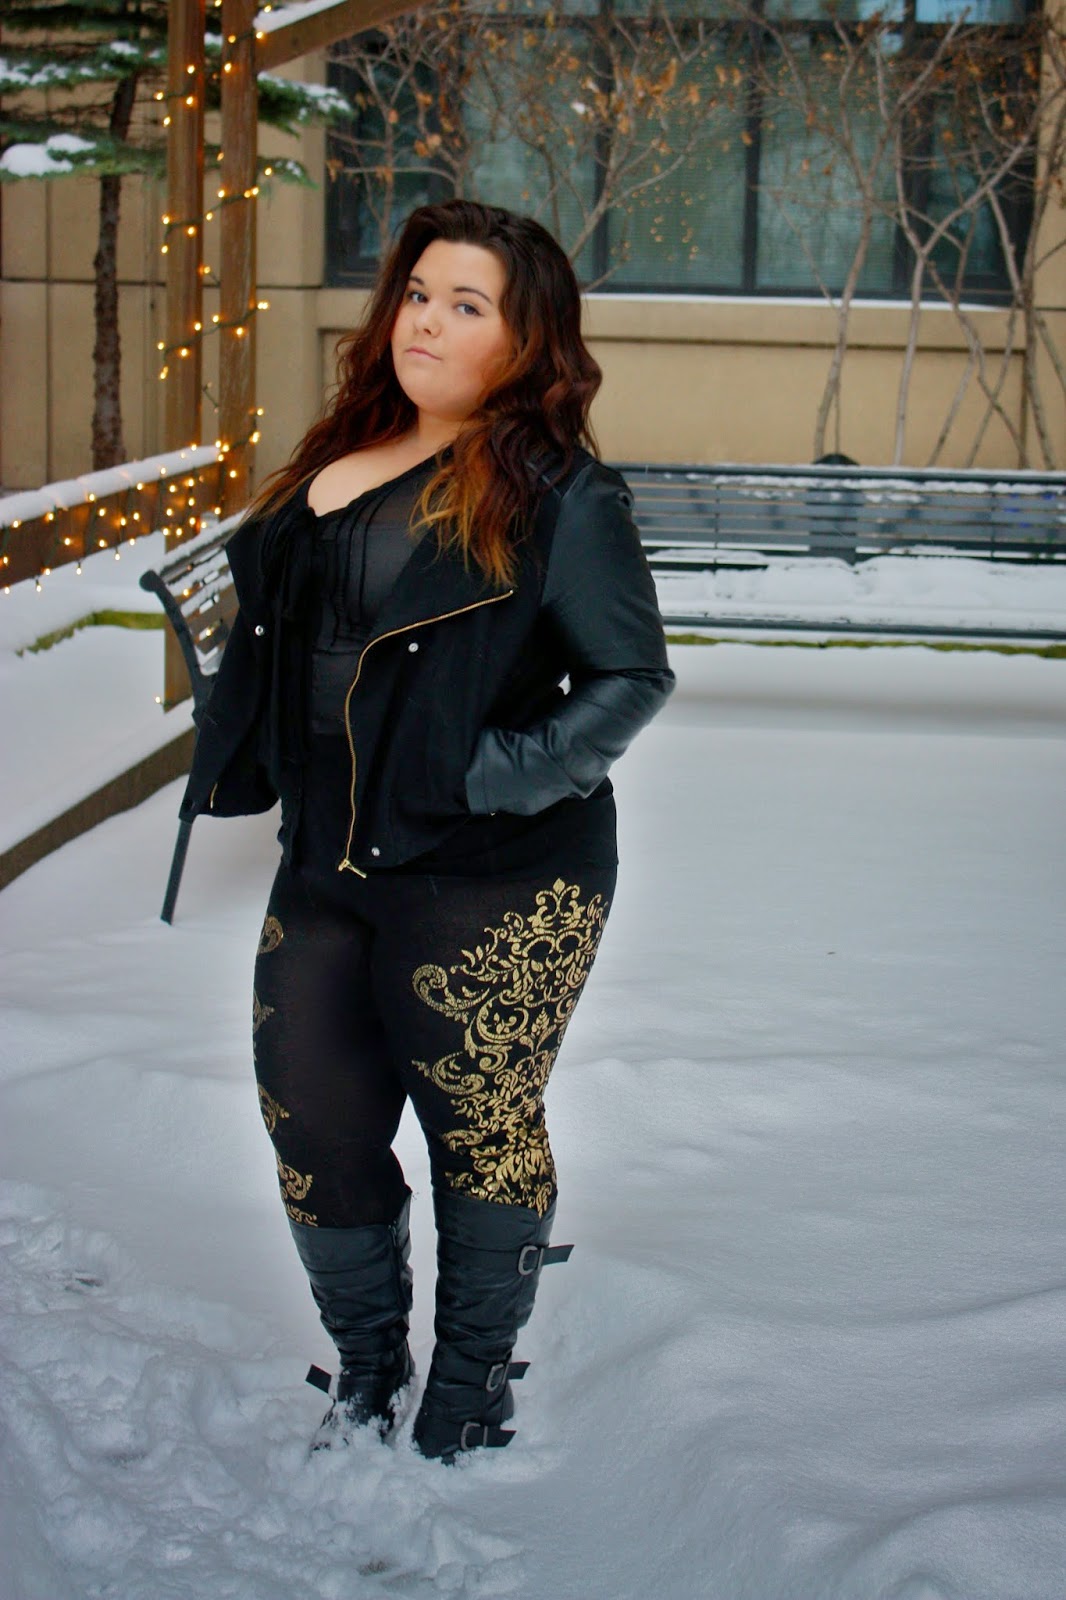 forever 21, forever 21 plus, plus size fashion, plus size fashion blogger, natalie craig, natalie in the city, chicago fashion, winter fashion, beyonce, beyonce gold, gold leggings, leather, contrast sleeves, bow tie blouse, chiffon, ombre, curly hair, thick girls, curvy girls, curvy fashion